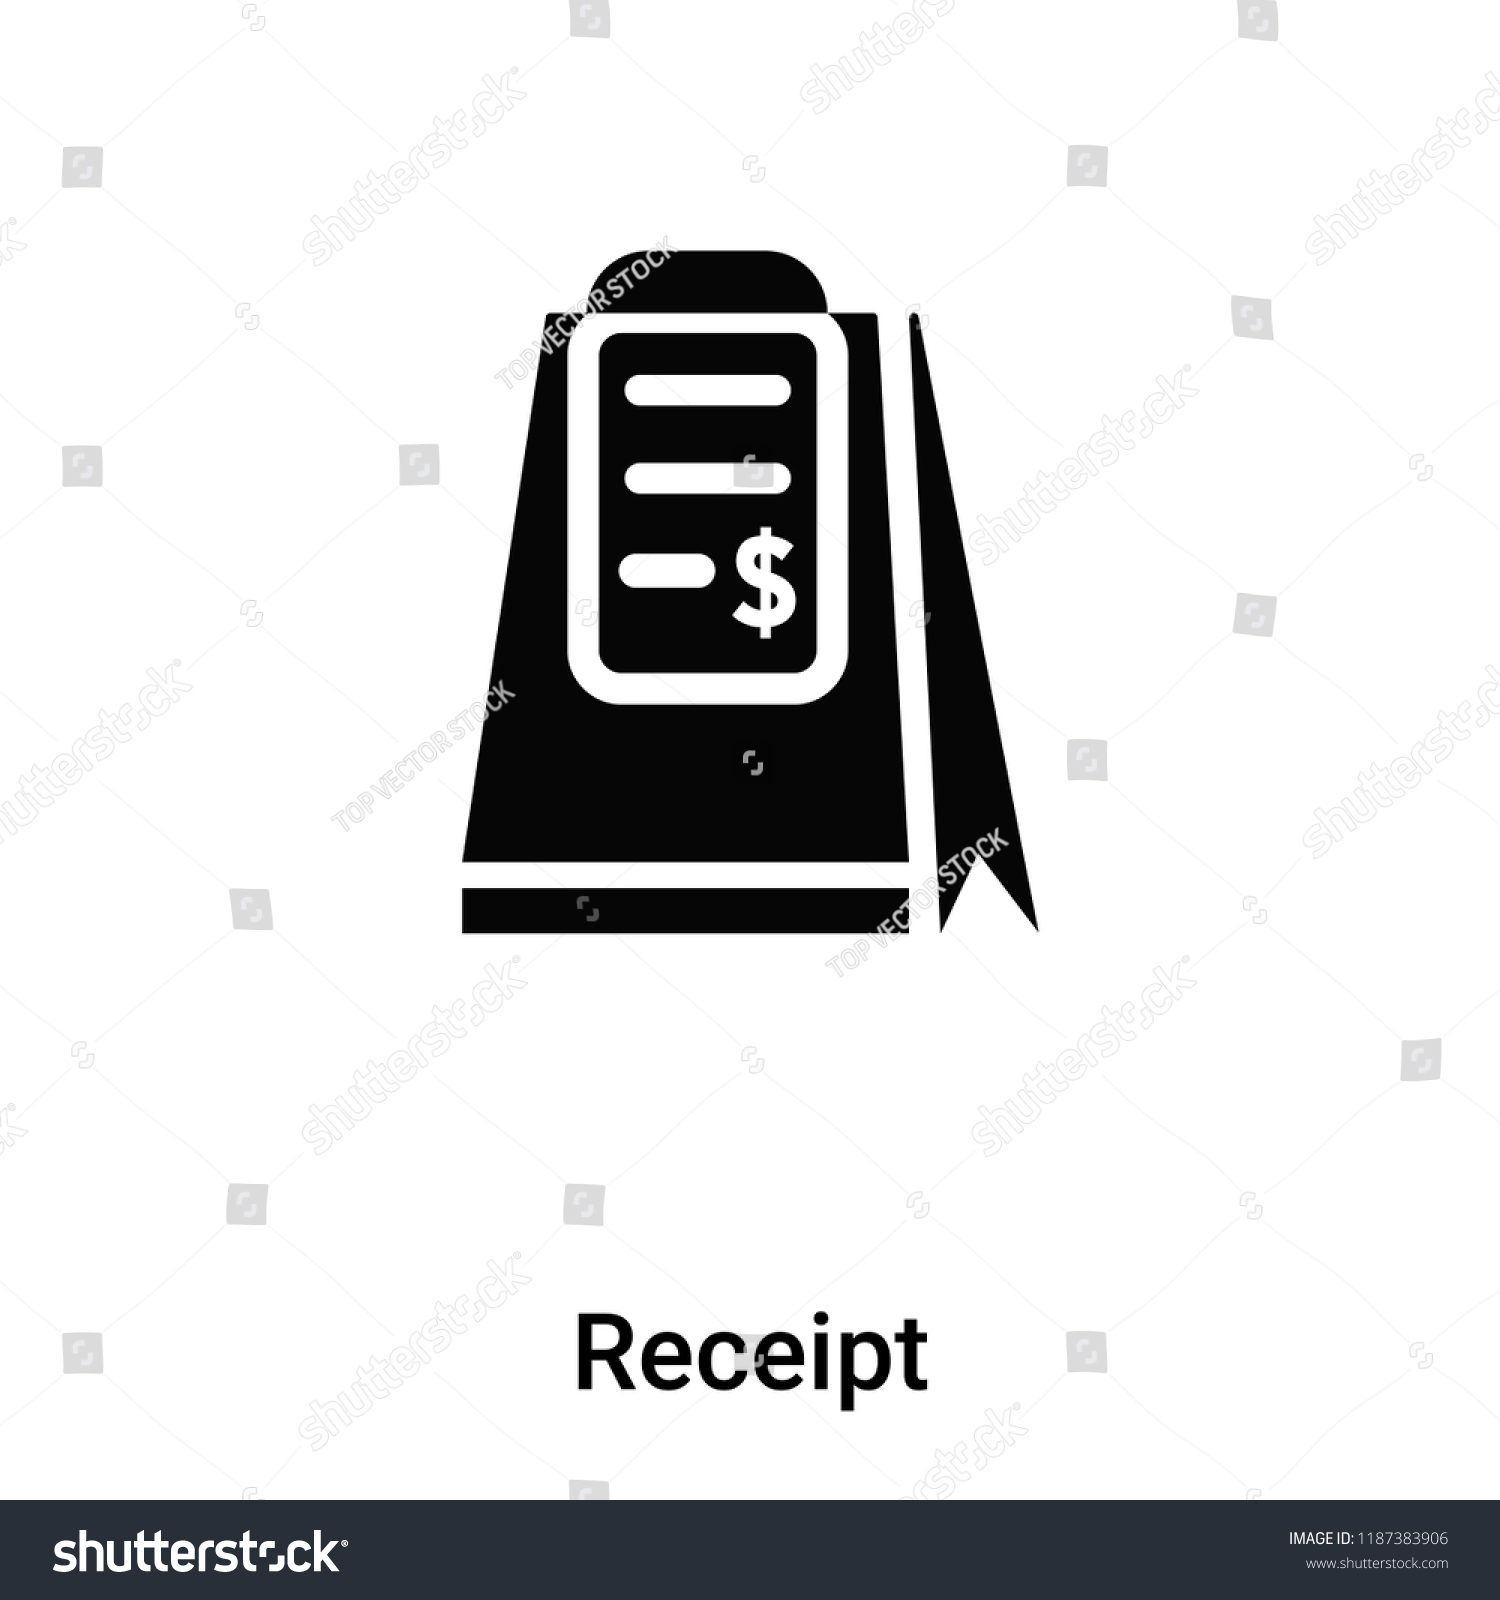 SVG of Receipt icon vector isolated on white background, logo concept of Receipt sign on transparent background, filled black symbol svg